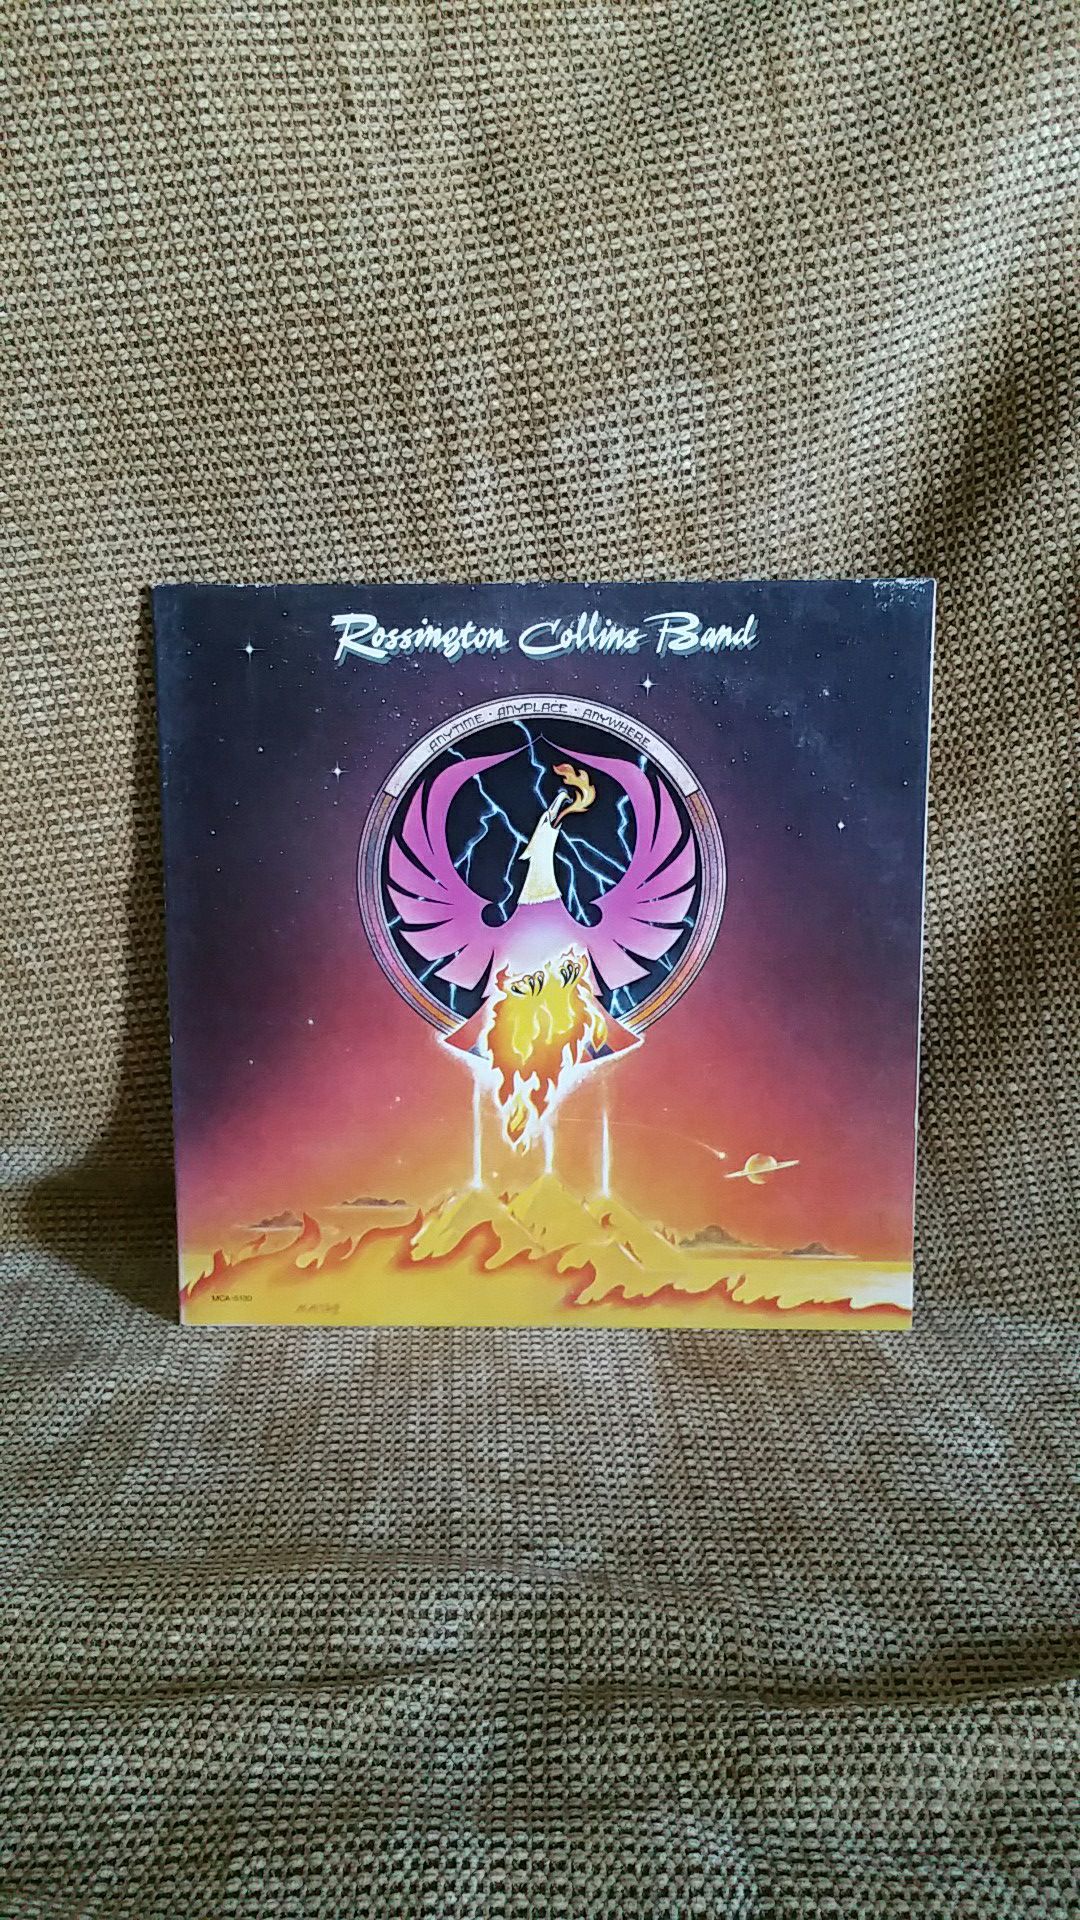 Rossington Collins Band "Anytime, Anyplace, Anywhere."